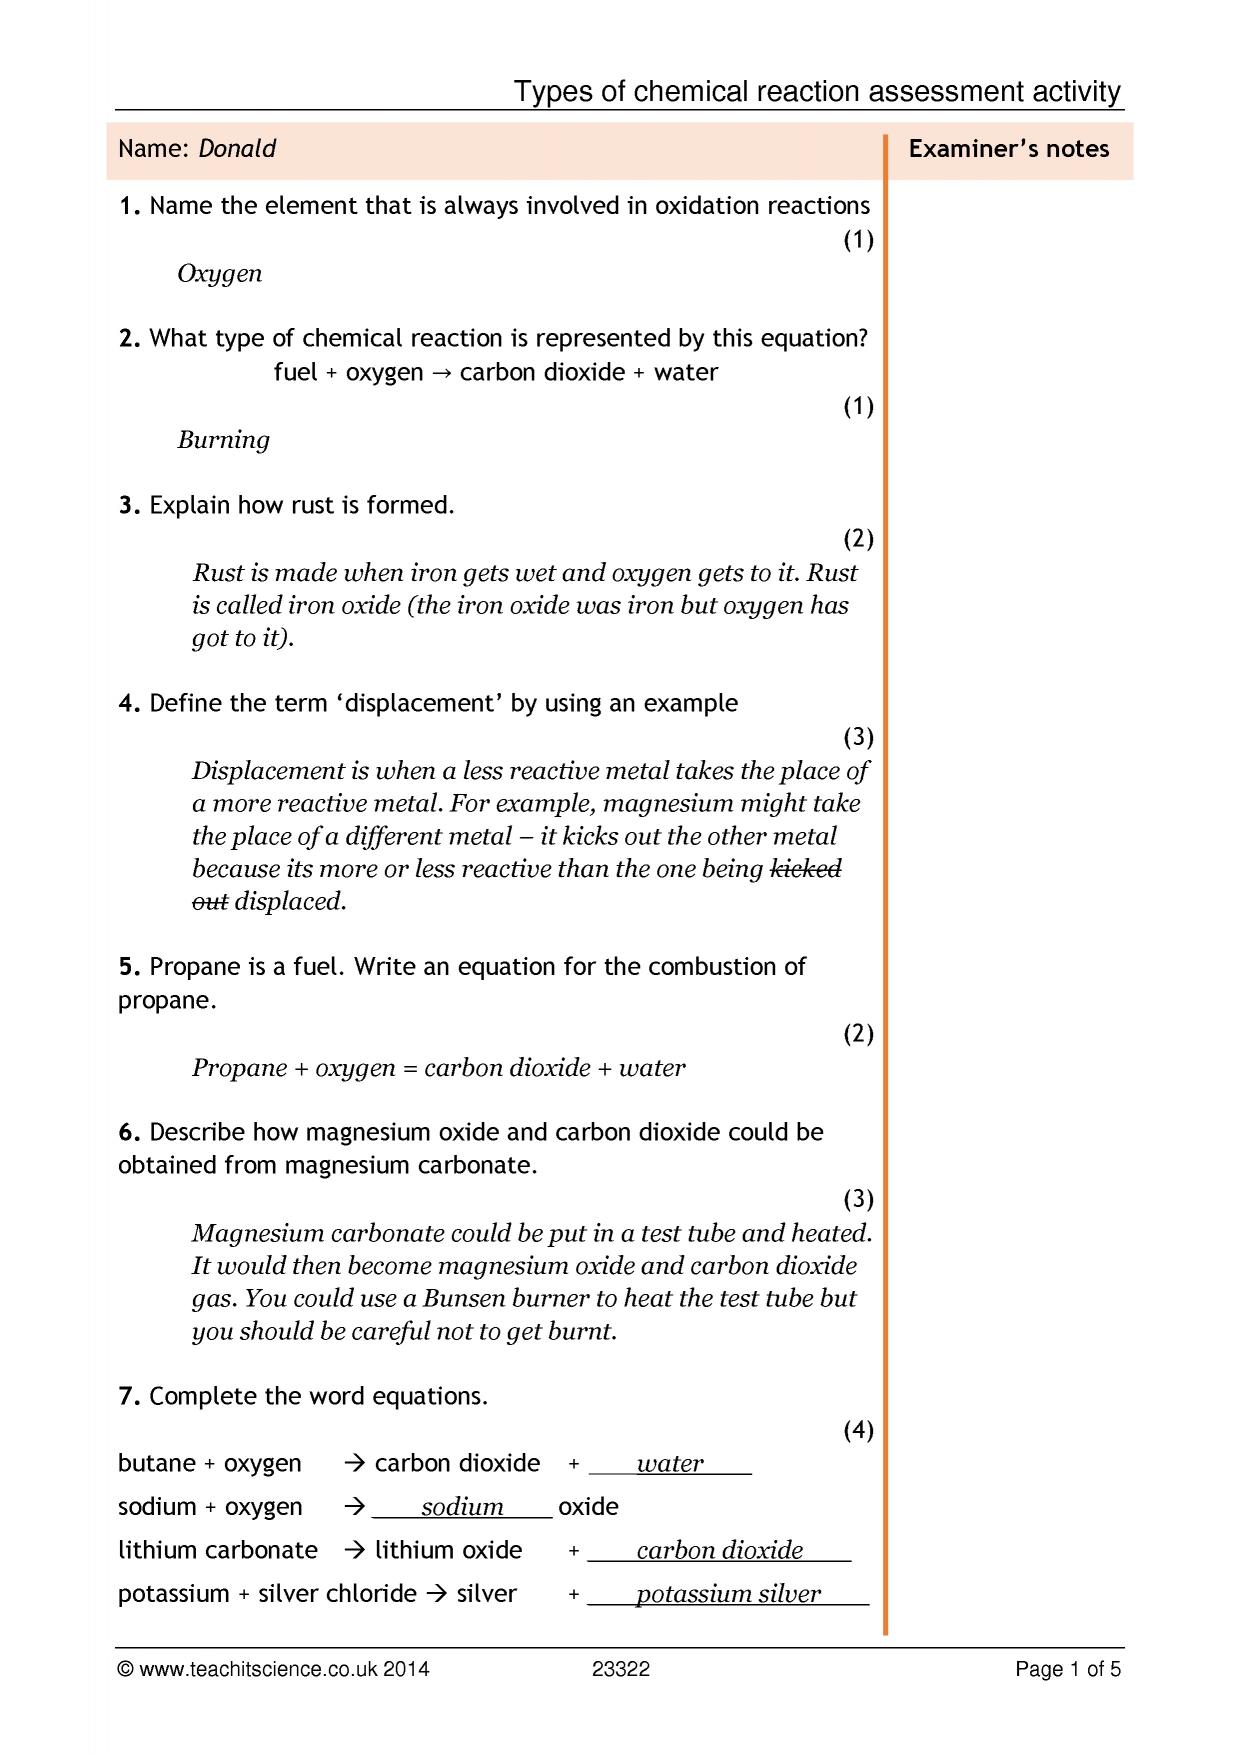 Types of chemical reaction assessment activity Within Chemical Reactions Types Worksheet